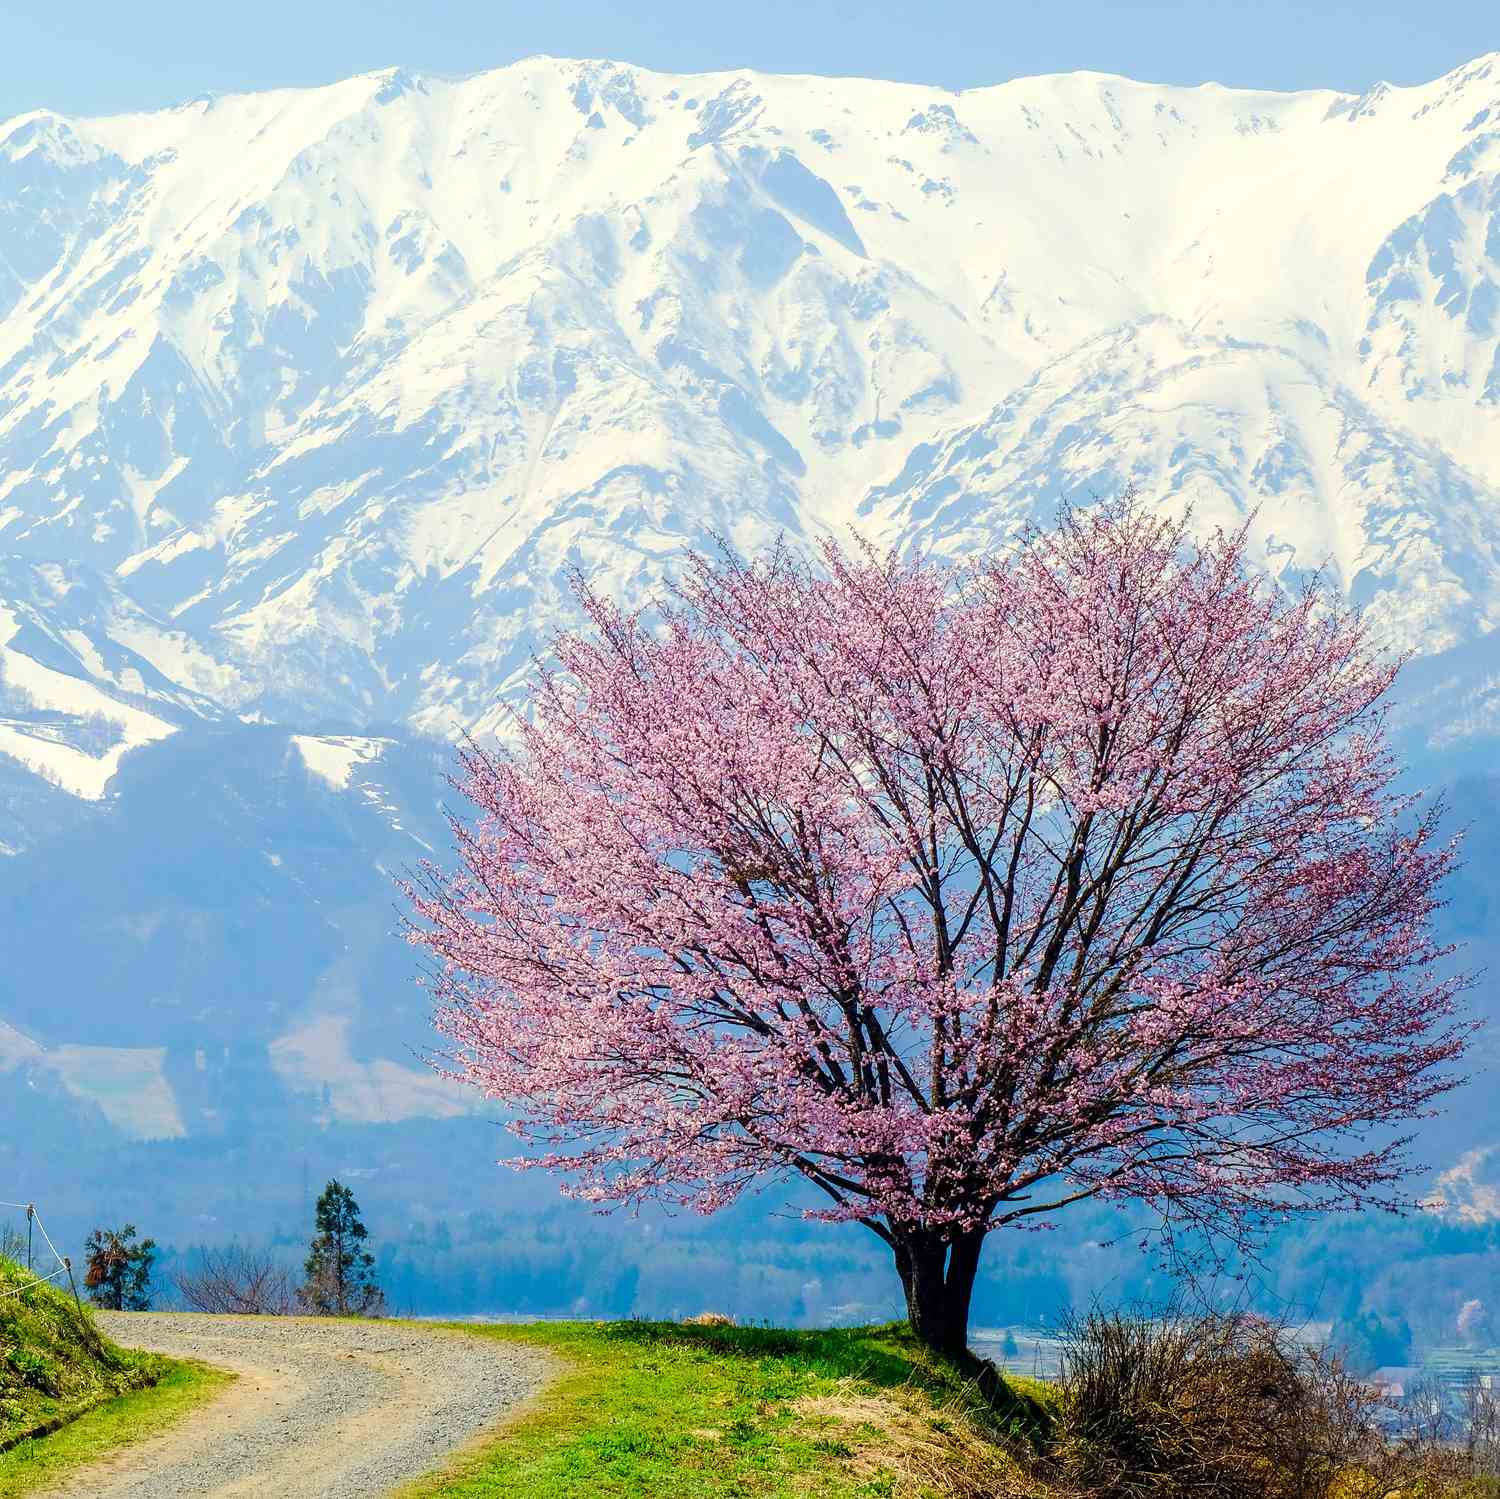 Cherry blossoms in full bloom in the mountain village against the backdrop of the Hakuba mountain range in Nagano Prefecture = Shutterstock